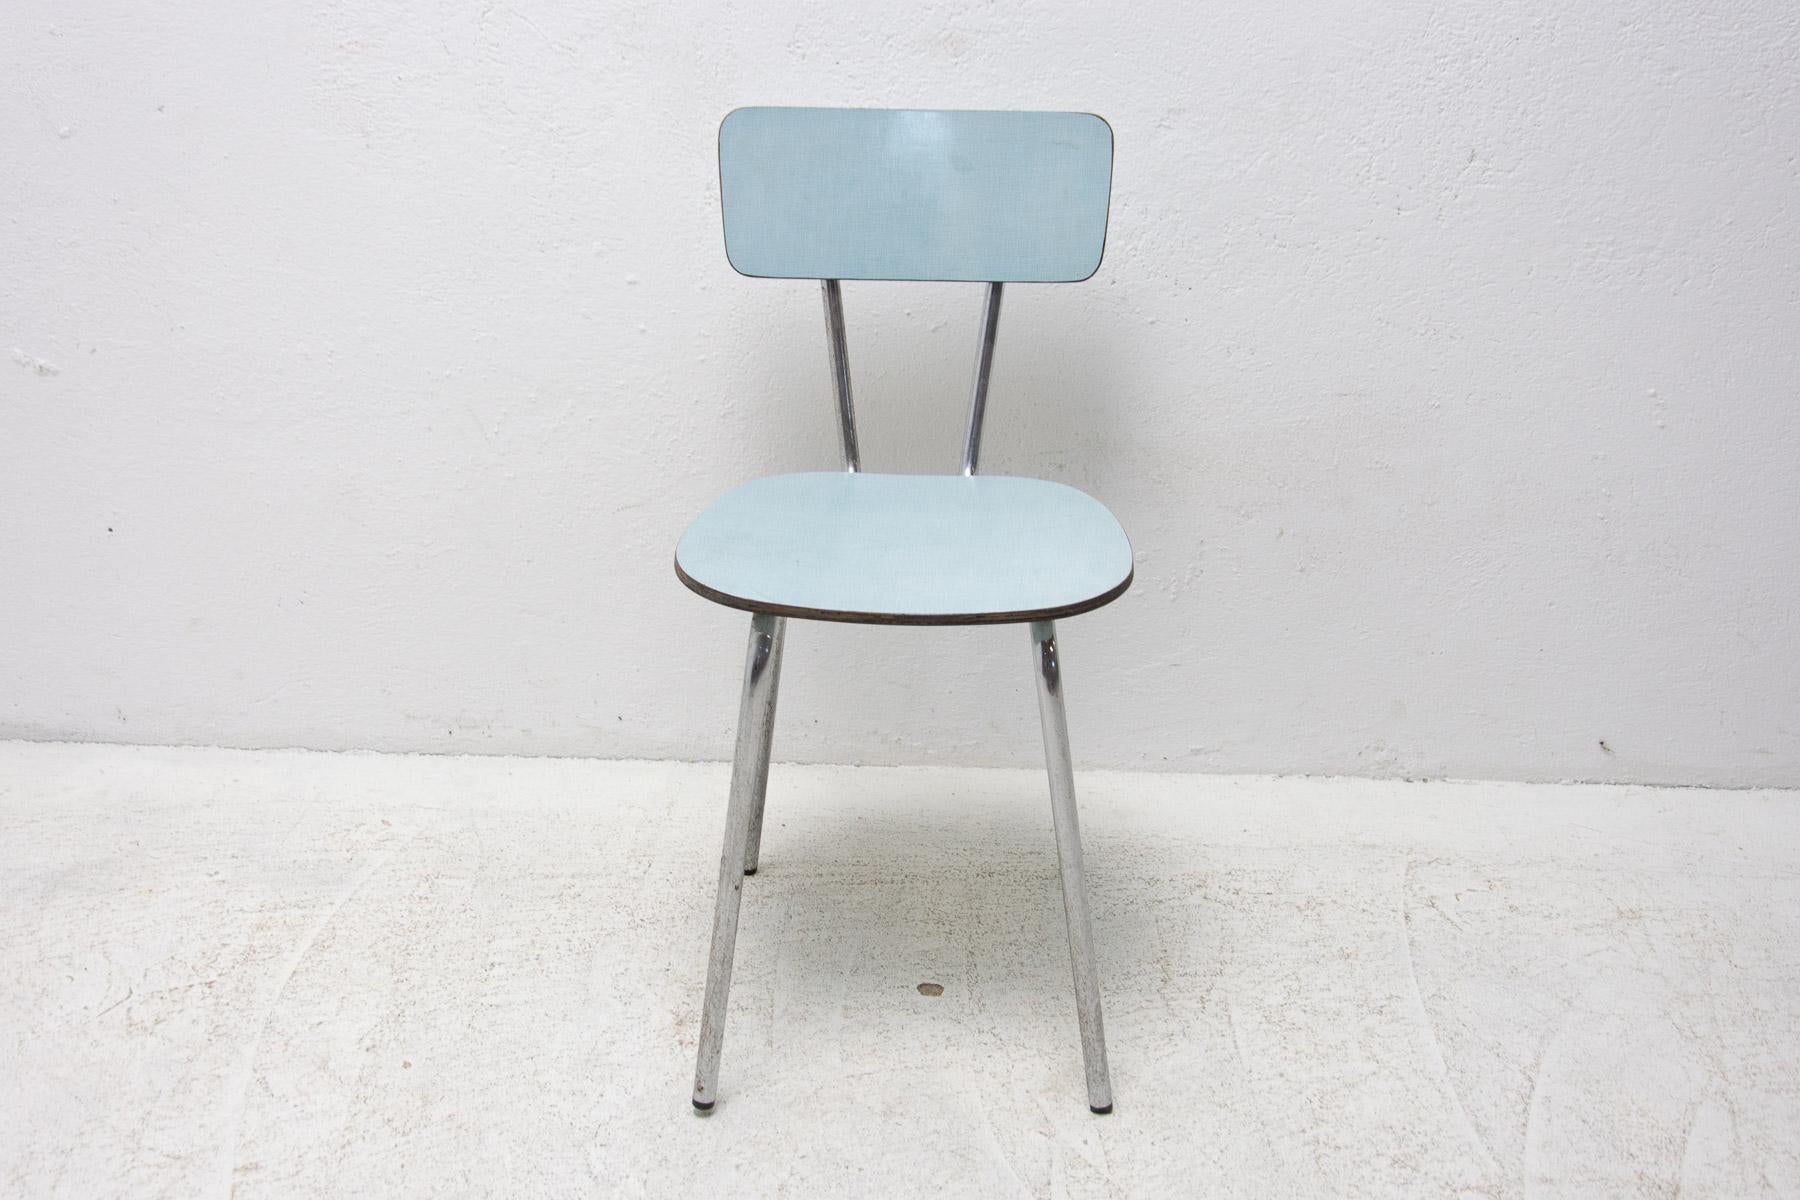 Czechoslovak Colored Formica Cafe Chair, 1960's For Sale 2